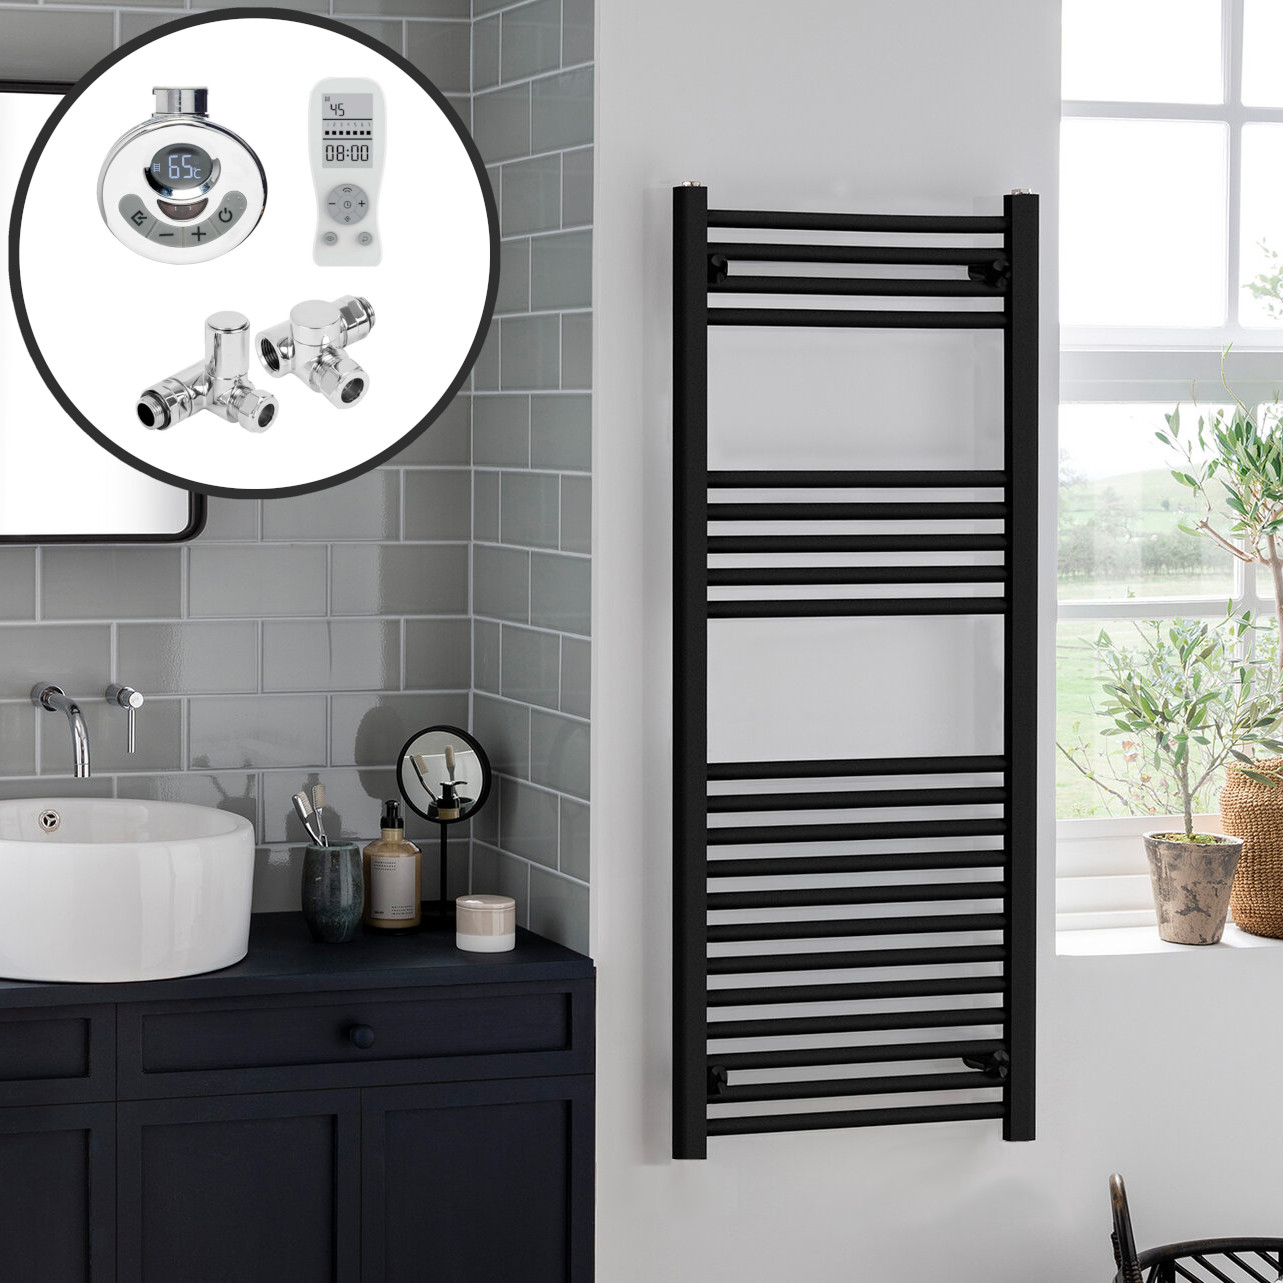 Bray Black Straight Towel Warmer / Heated Towel Rail Radiator – Dual Fuel, Thermostat + Timer Best Quality & Price, Energy Saving / Economic To Run Buy Online From Adax SolAire UK Shop